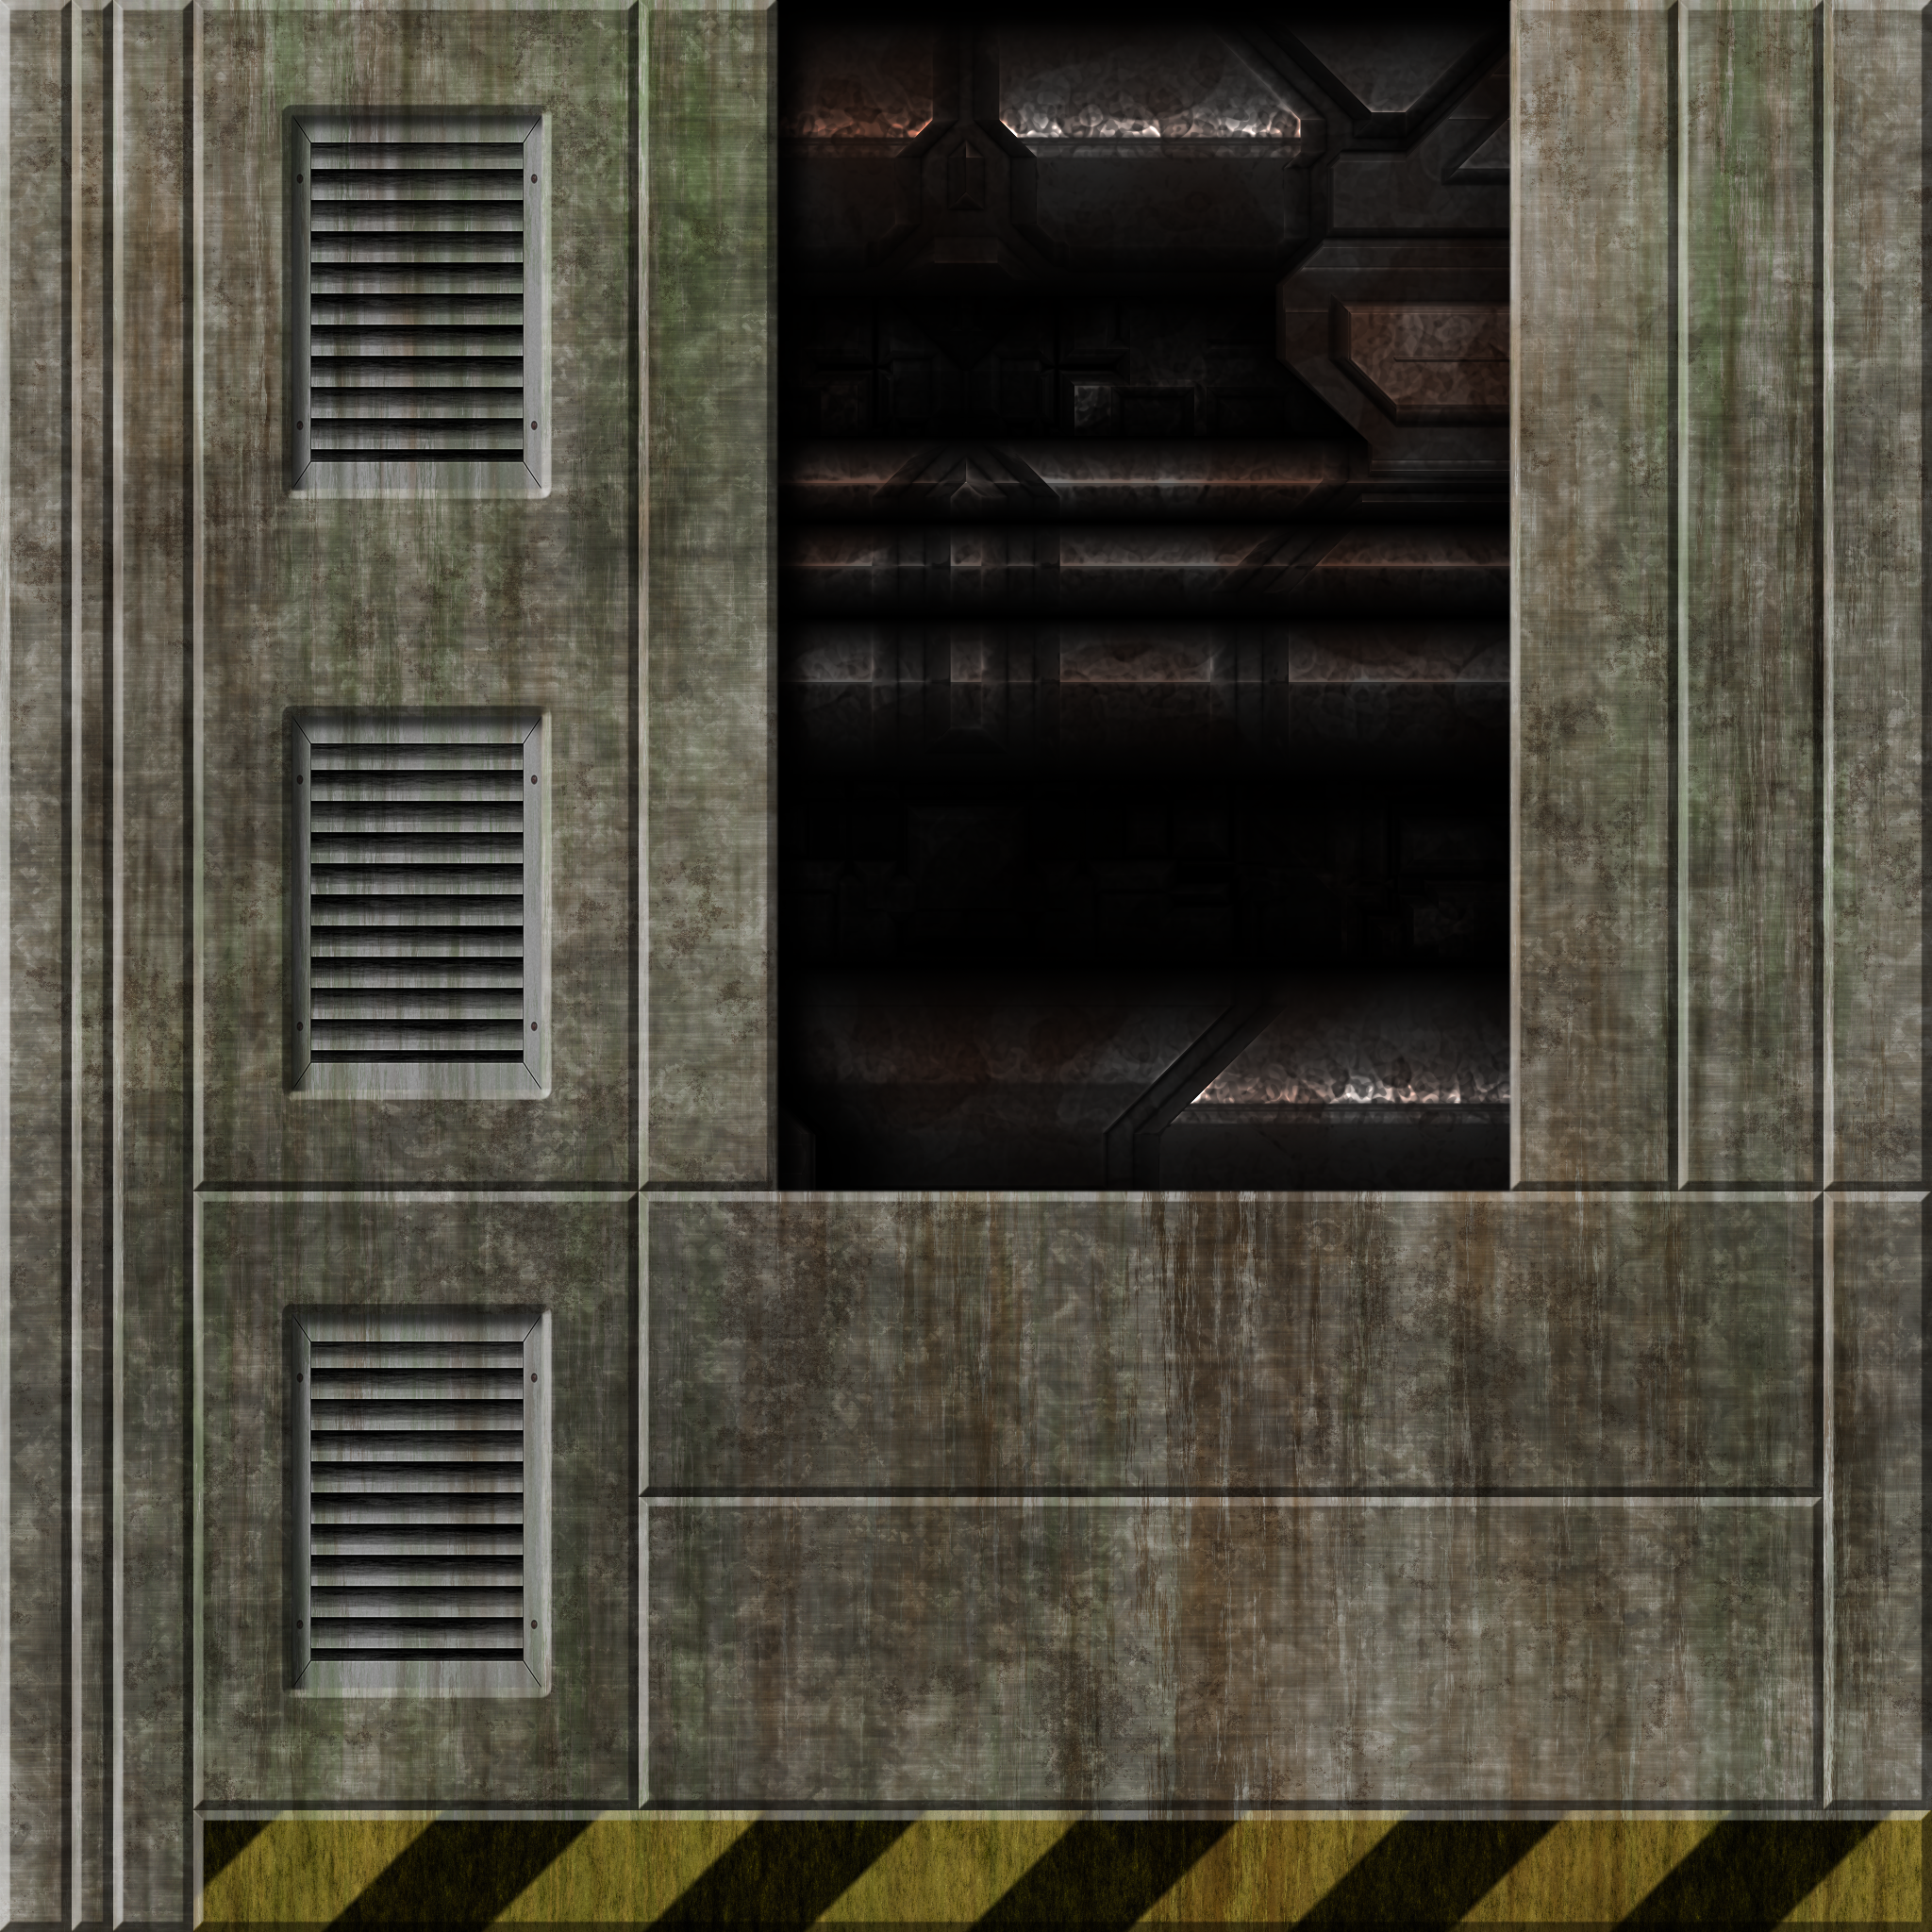 cement_wall_2_remake_by_hoover1979-dar4bhj.png